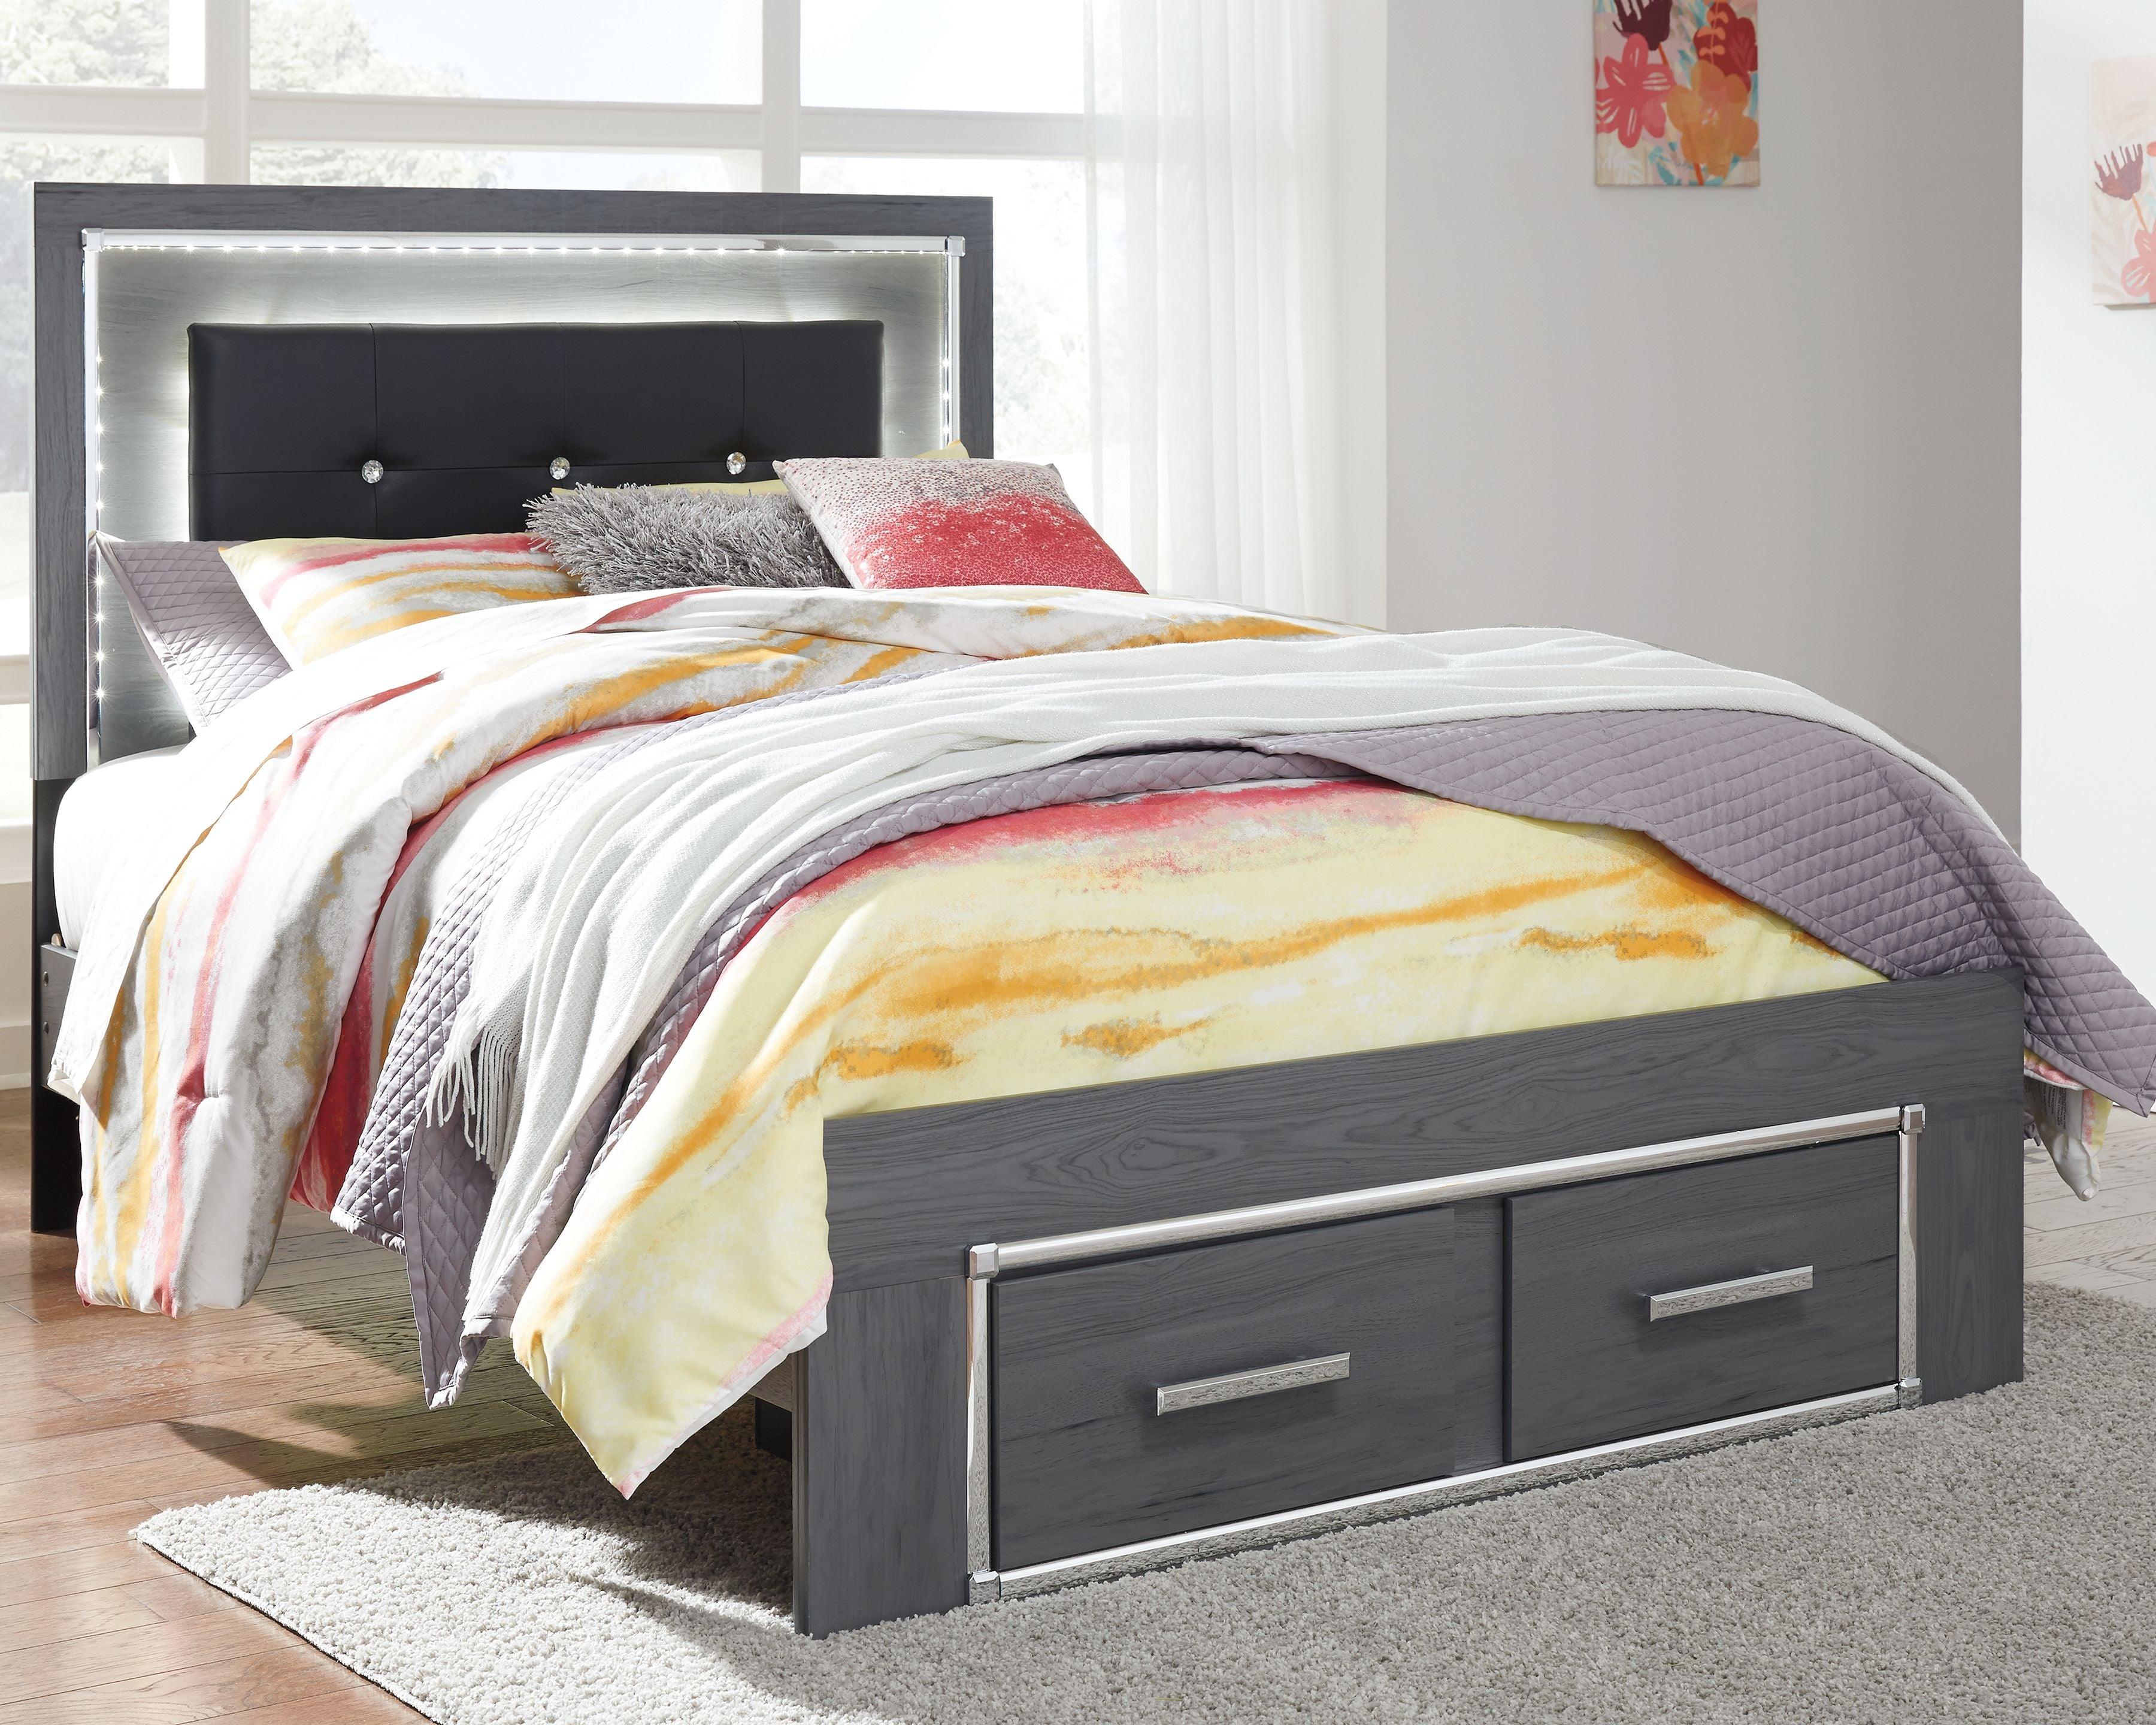 Signature Design by Ashley® - Lodanna - Youth Panel Bedroom Set - 5th Avenue Furniture